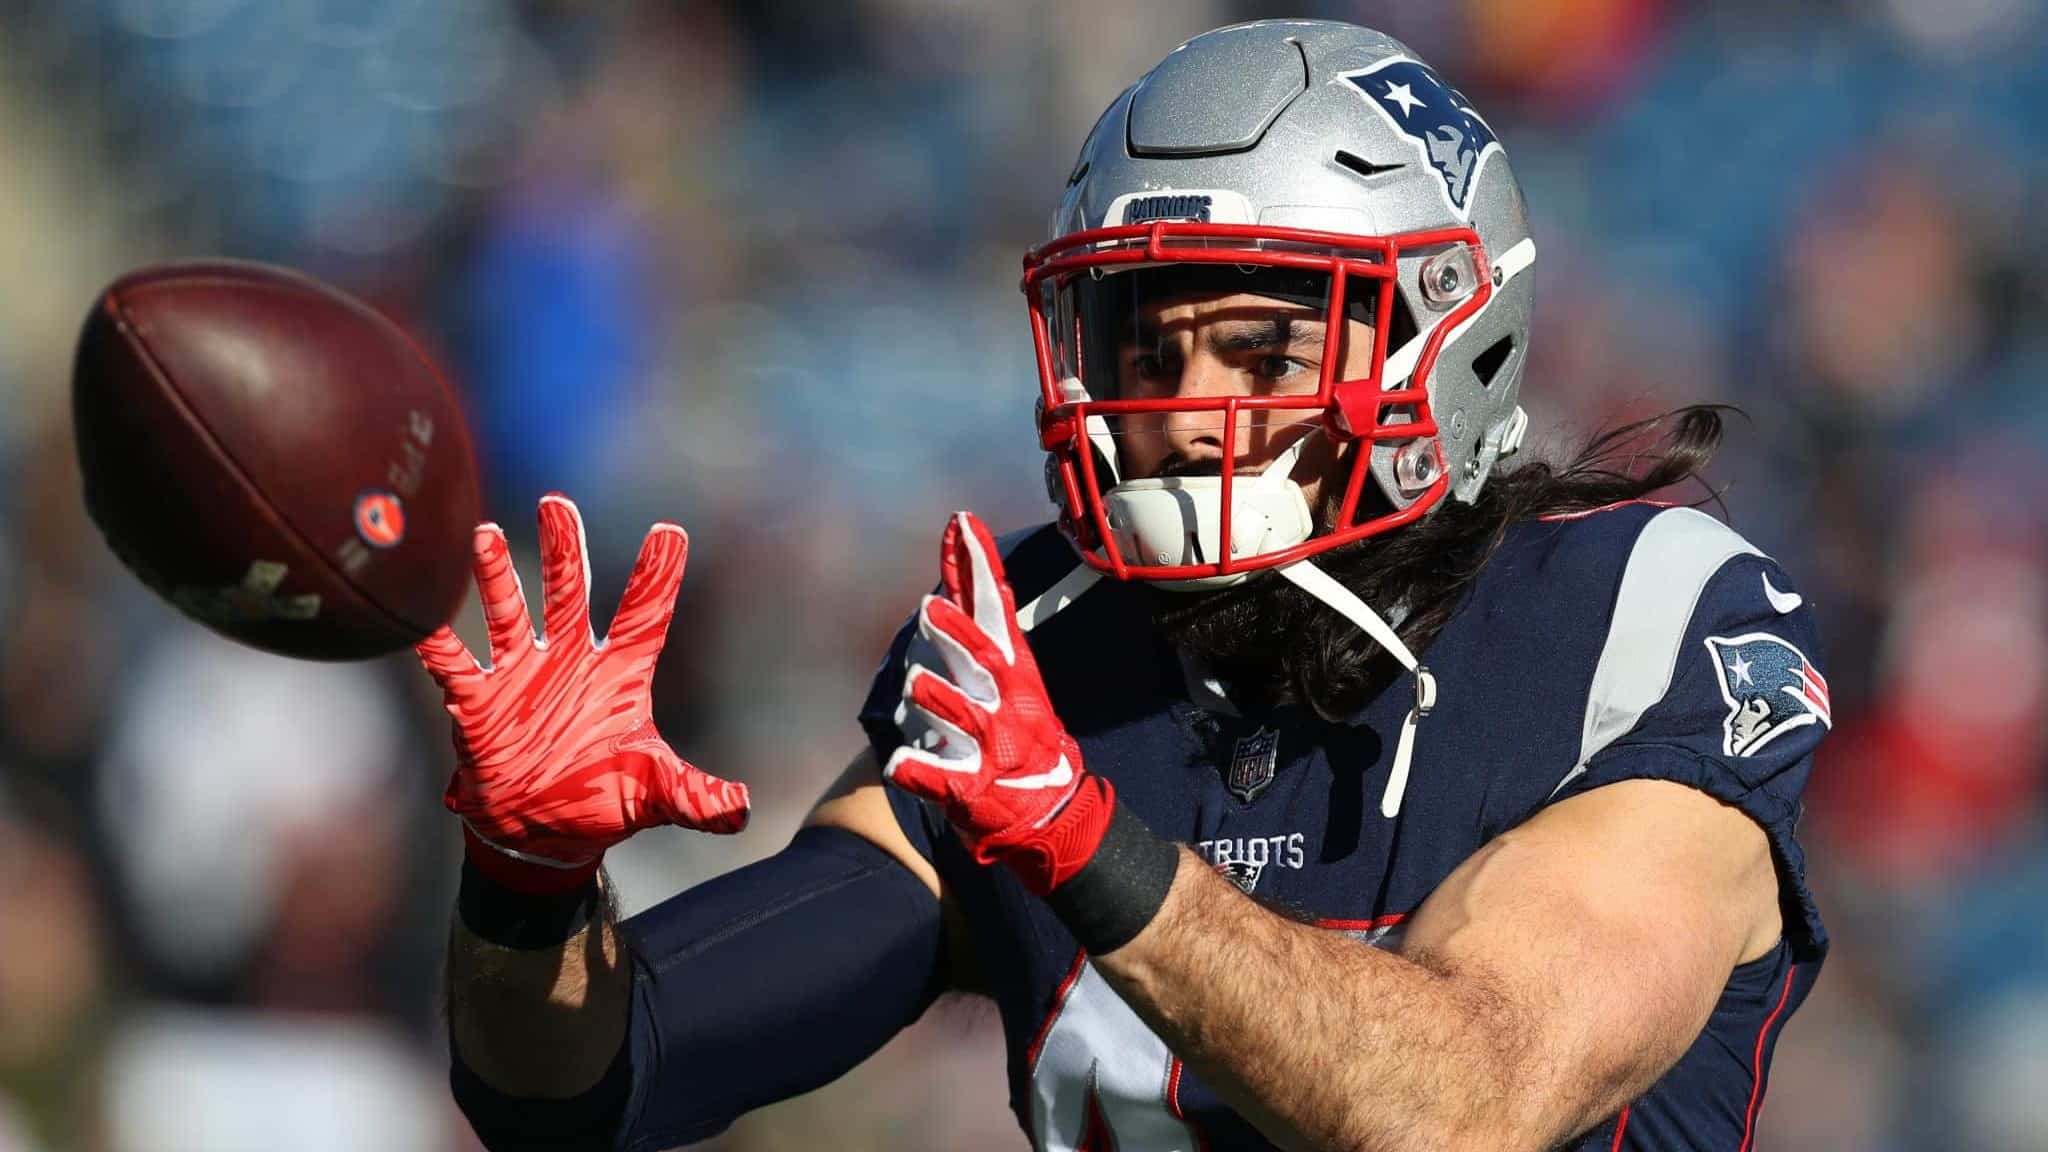 FOXBOROUGH, MASSACHUSETTS - DECEMBER 30: Nate Ebner #43 of the New England Patriots warms up before a game against the New York Jets at Gillette Stadium on December 30, 2018 in Foxborough, Massachusetts.